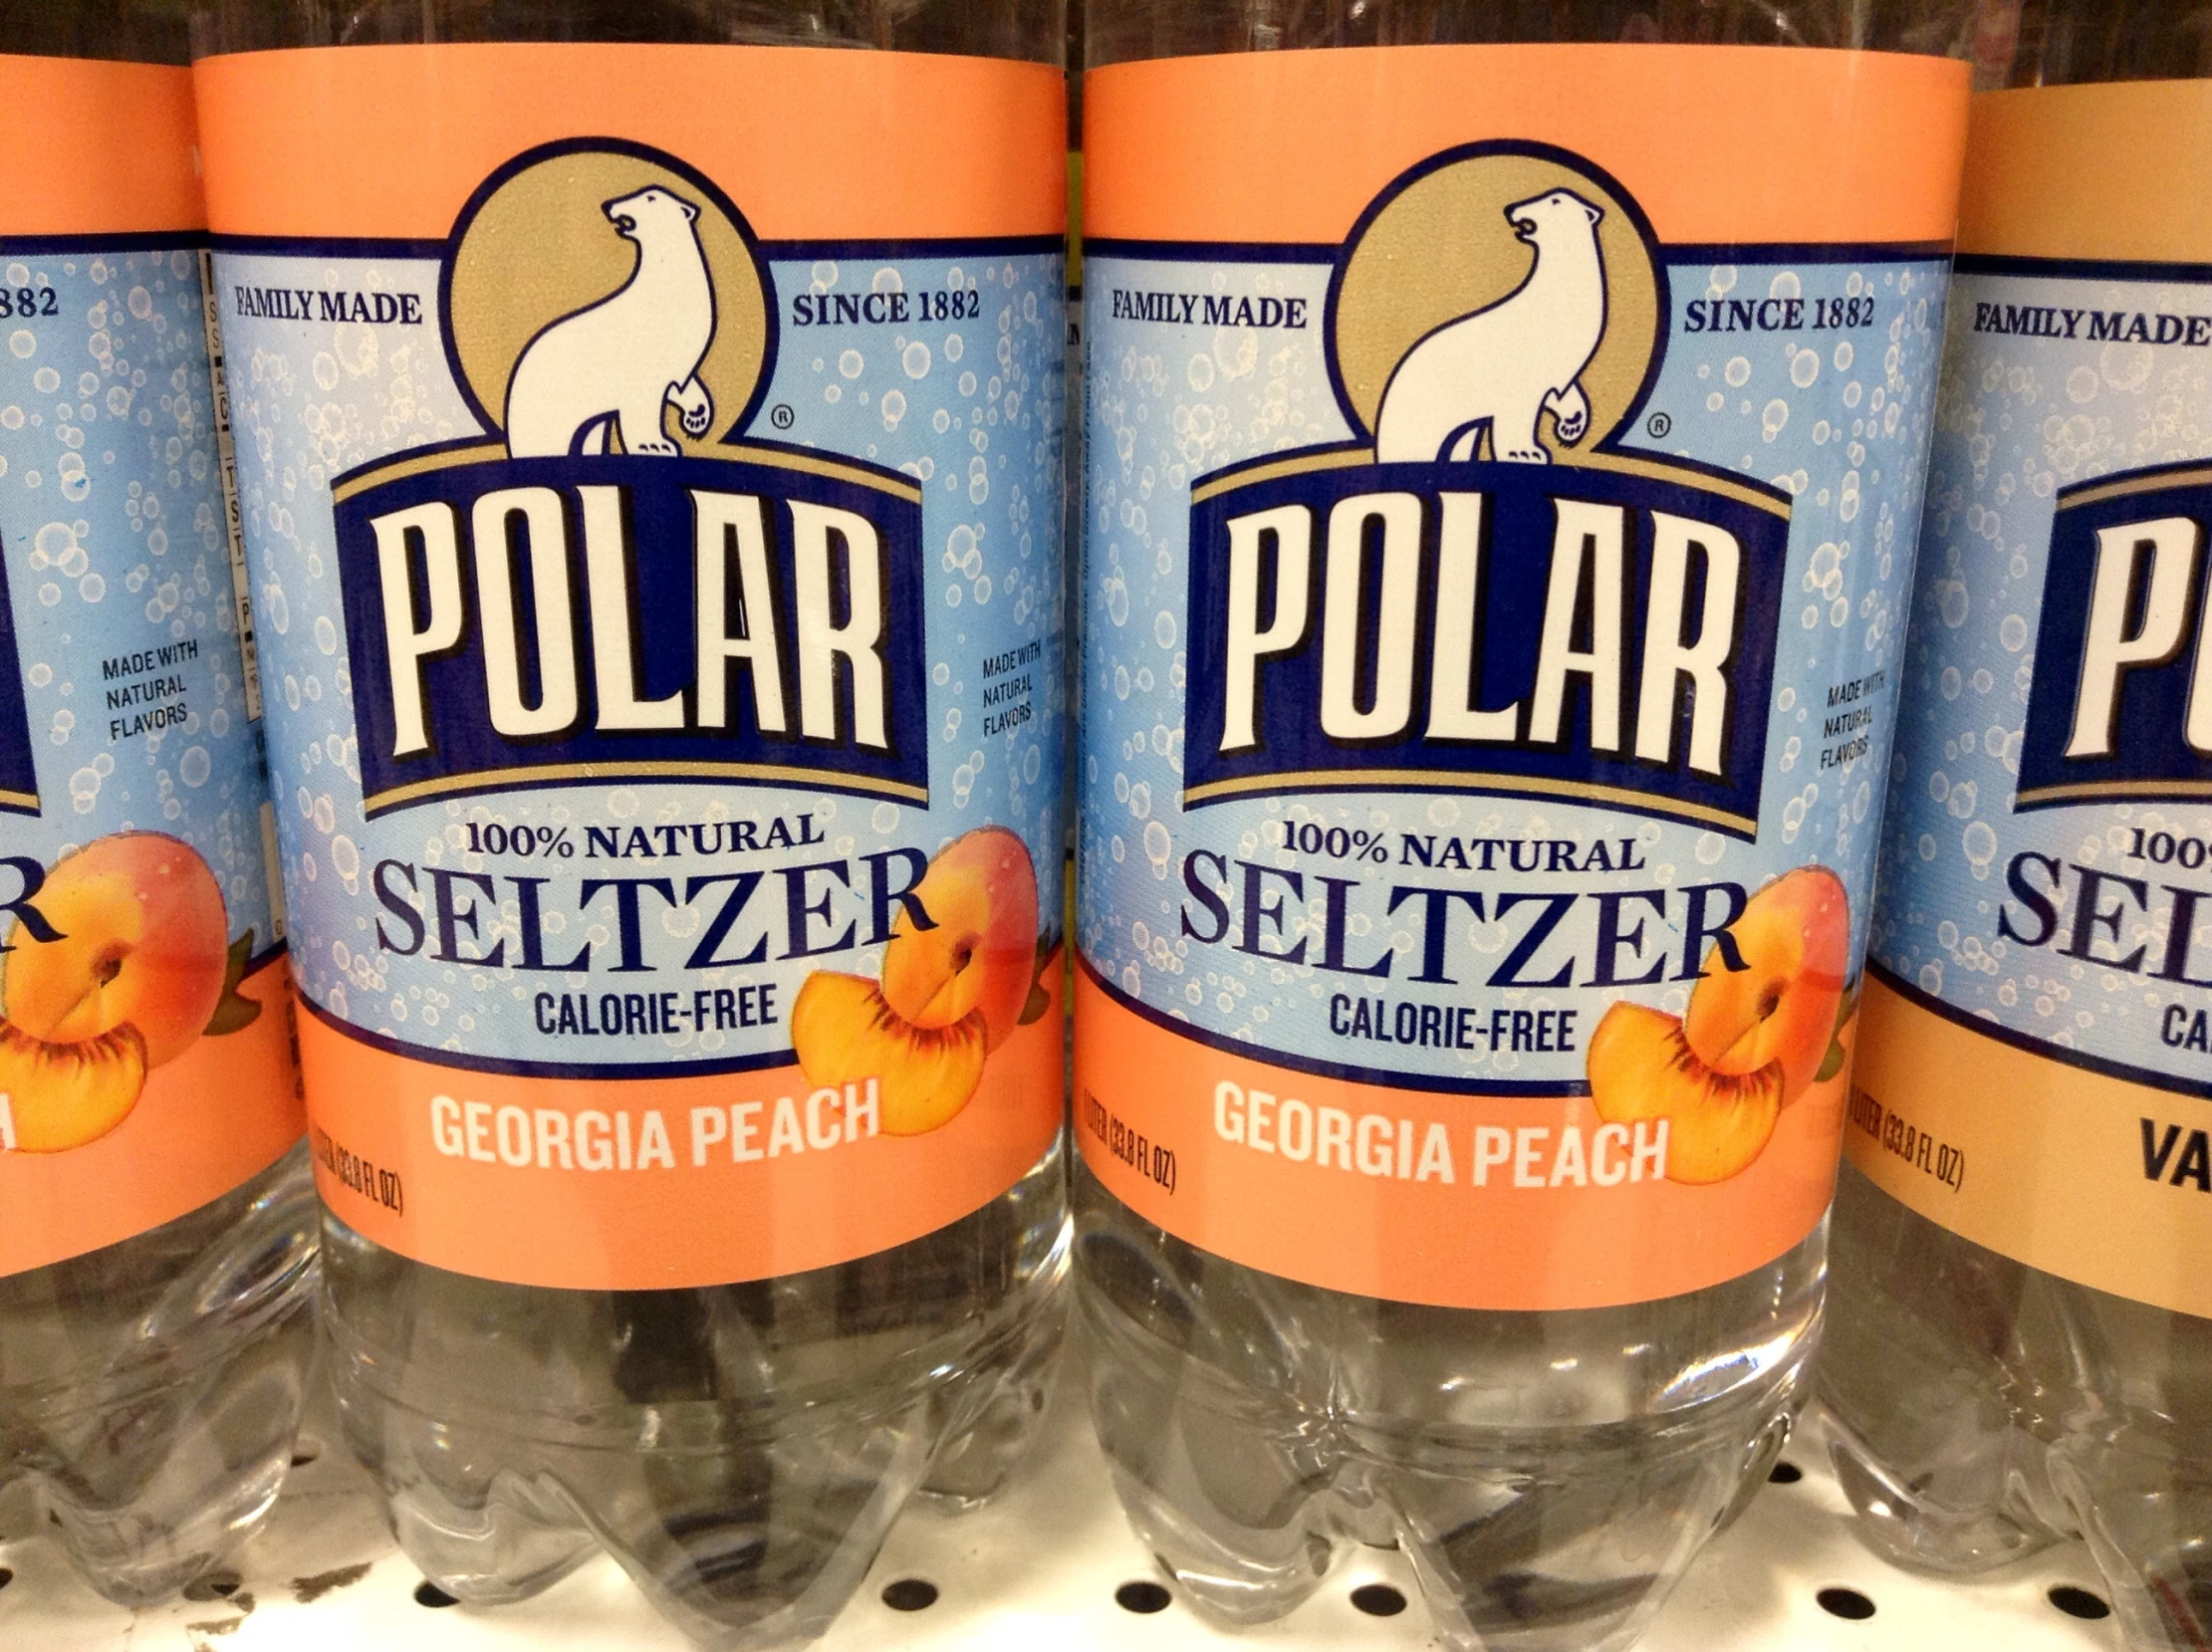 bottles of polish seawater are on a rack